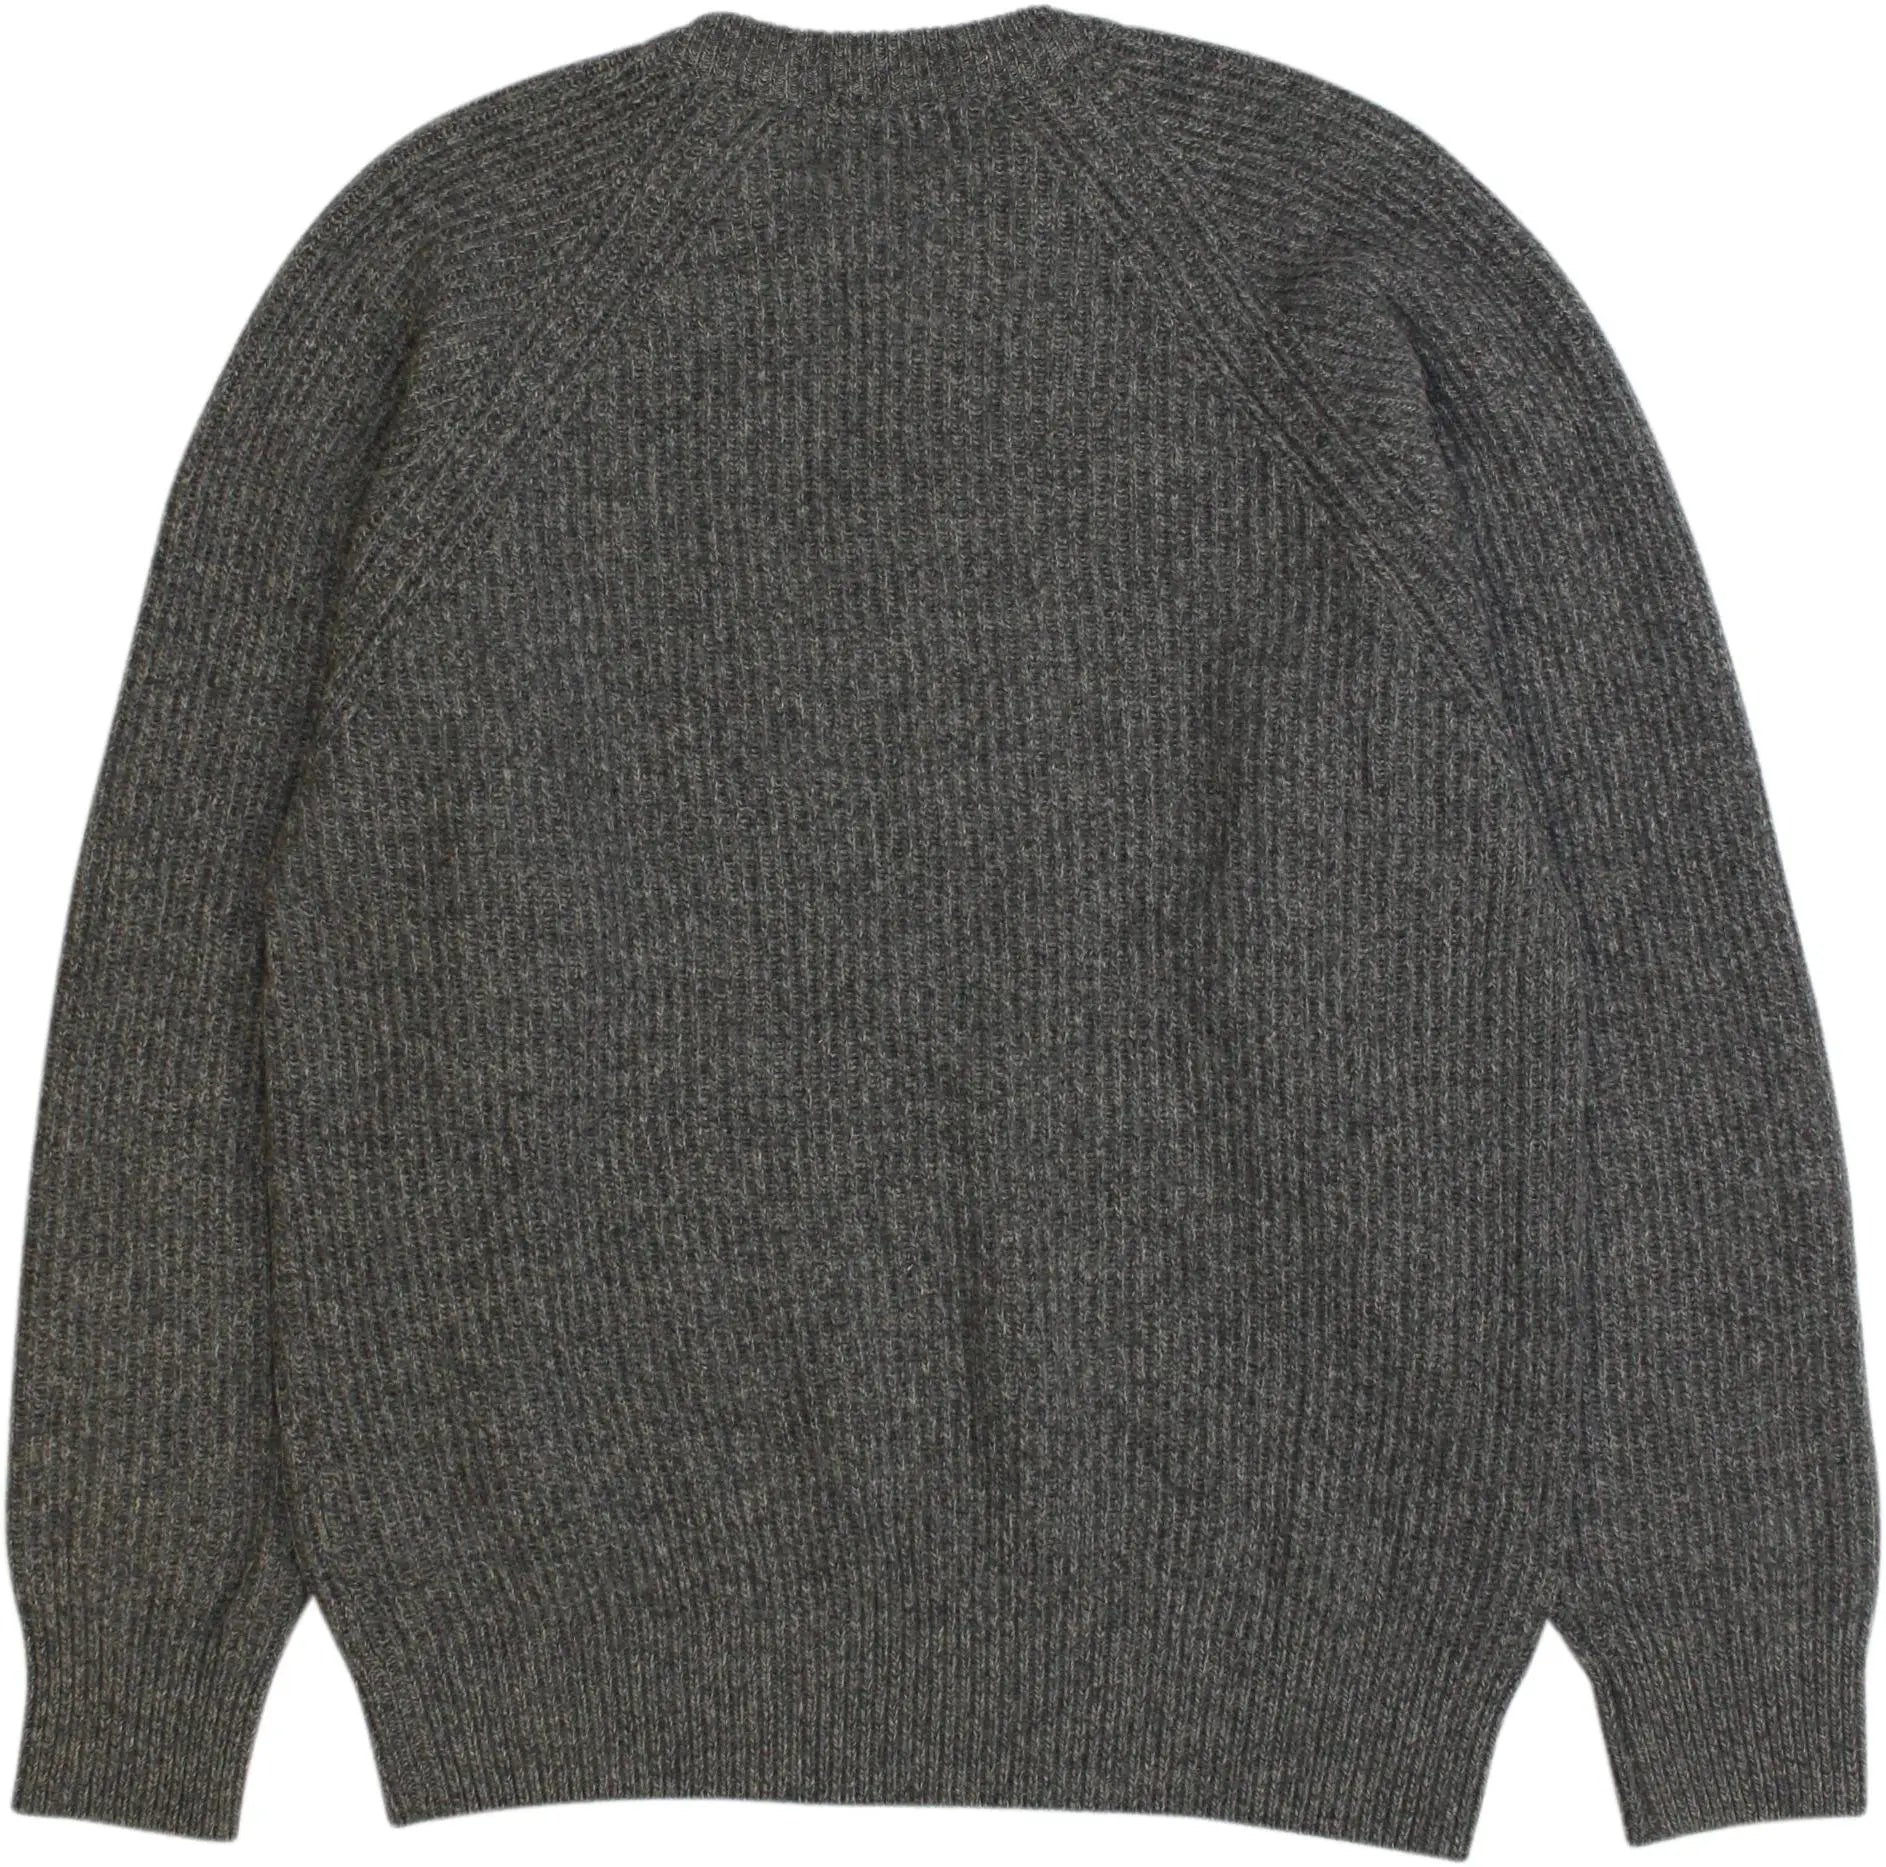 Kappa - Grey Knitted Sweater by Kappa- ThriftTale.com - Vintage and second handclothing